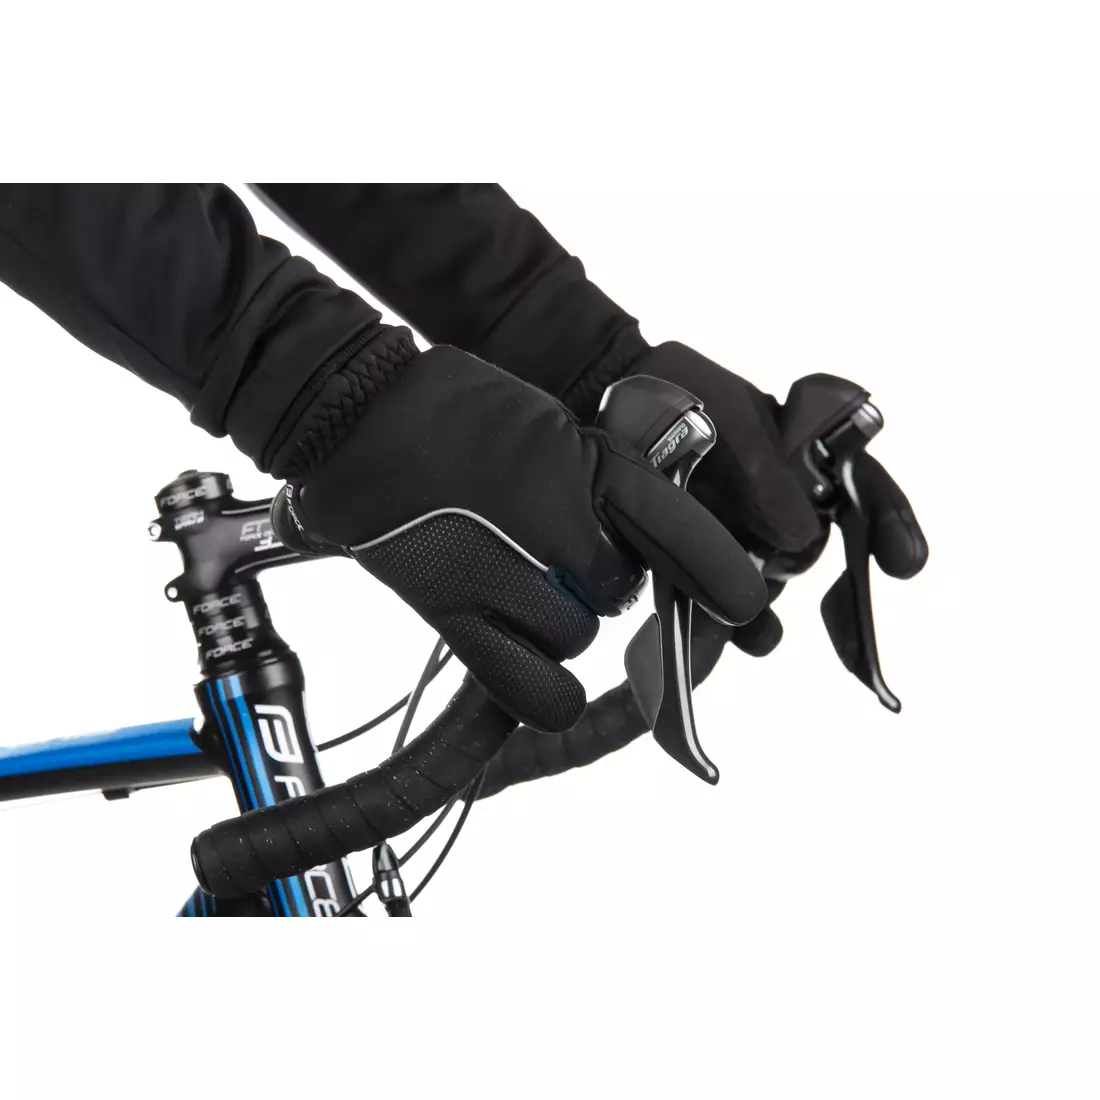 FORCE winter cycling gloves ARCTIC PRO black 904661